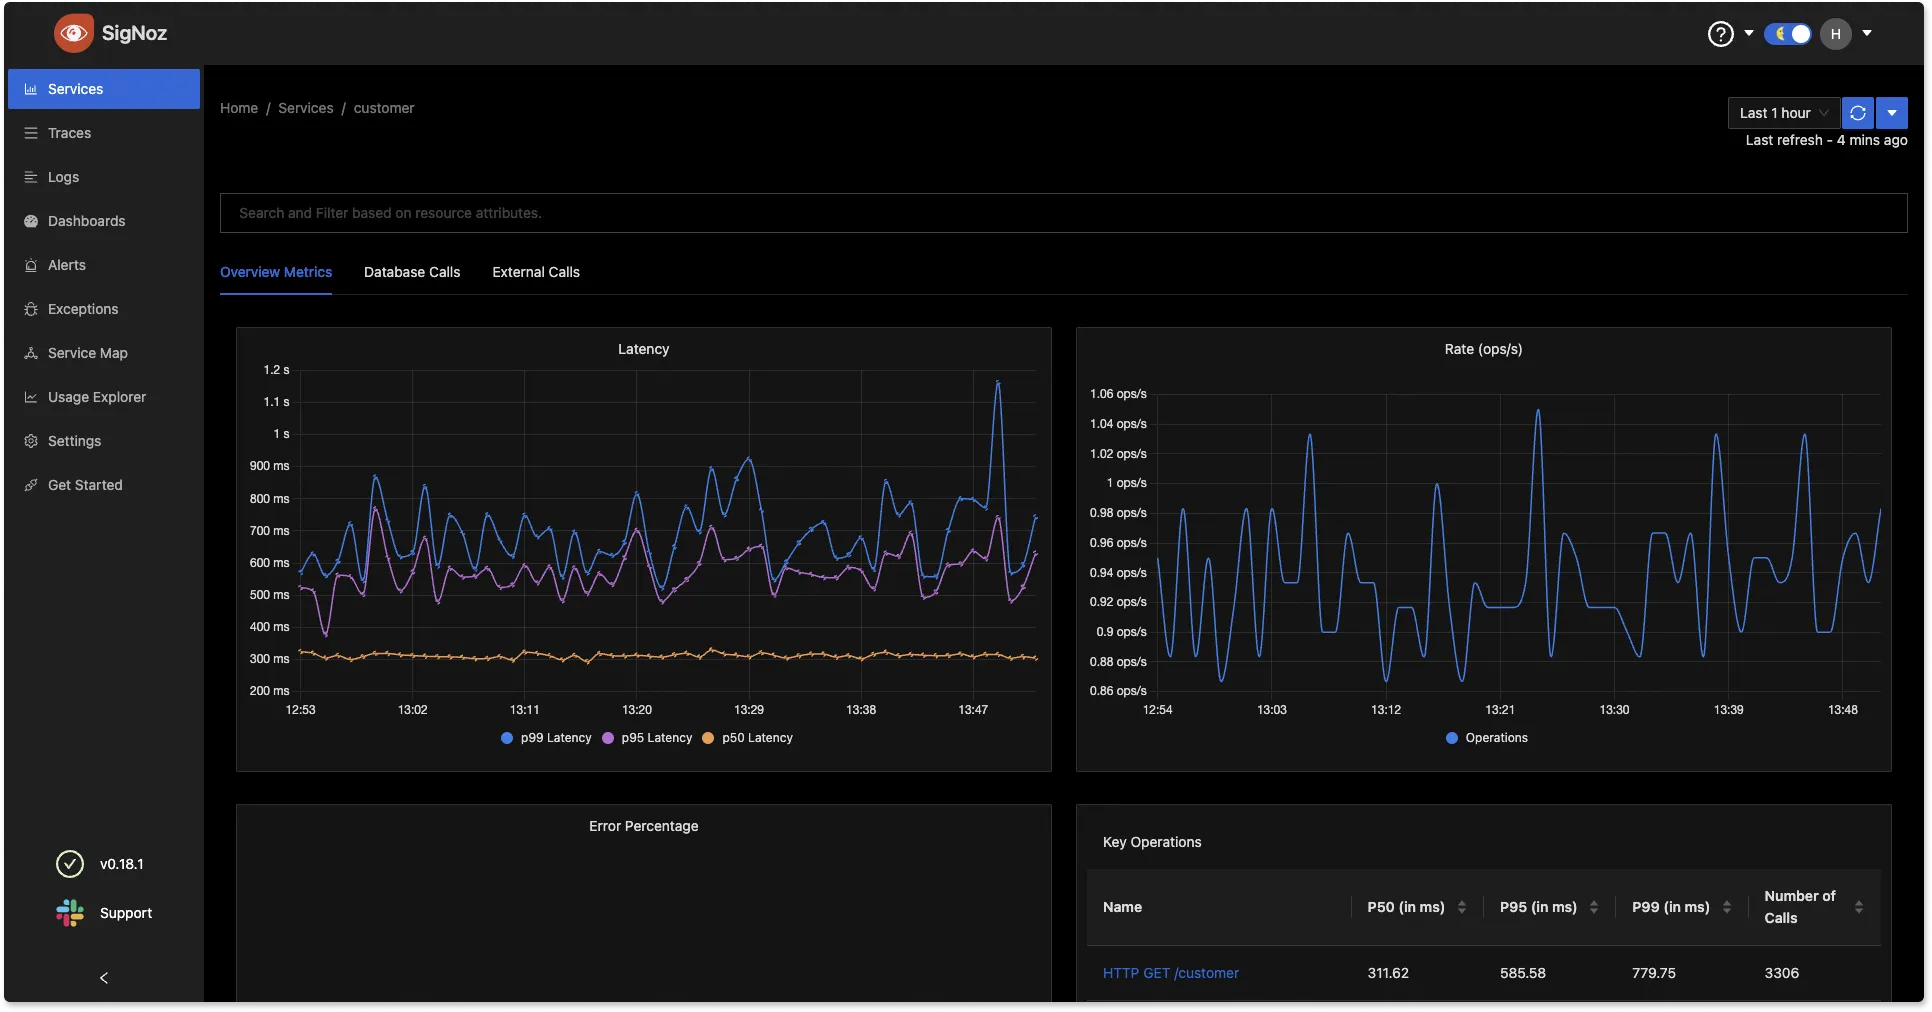 SigNoz dashboard showing application latency, requests per sec, error percentage and top endpoints